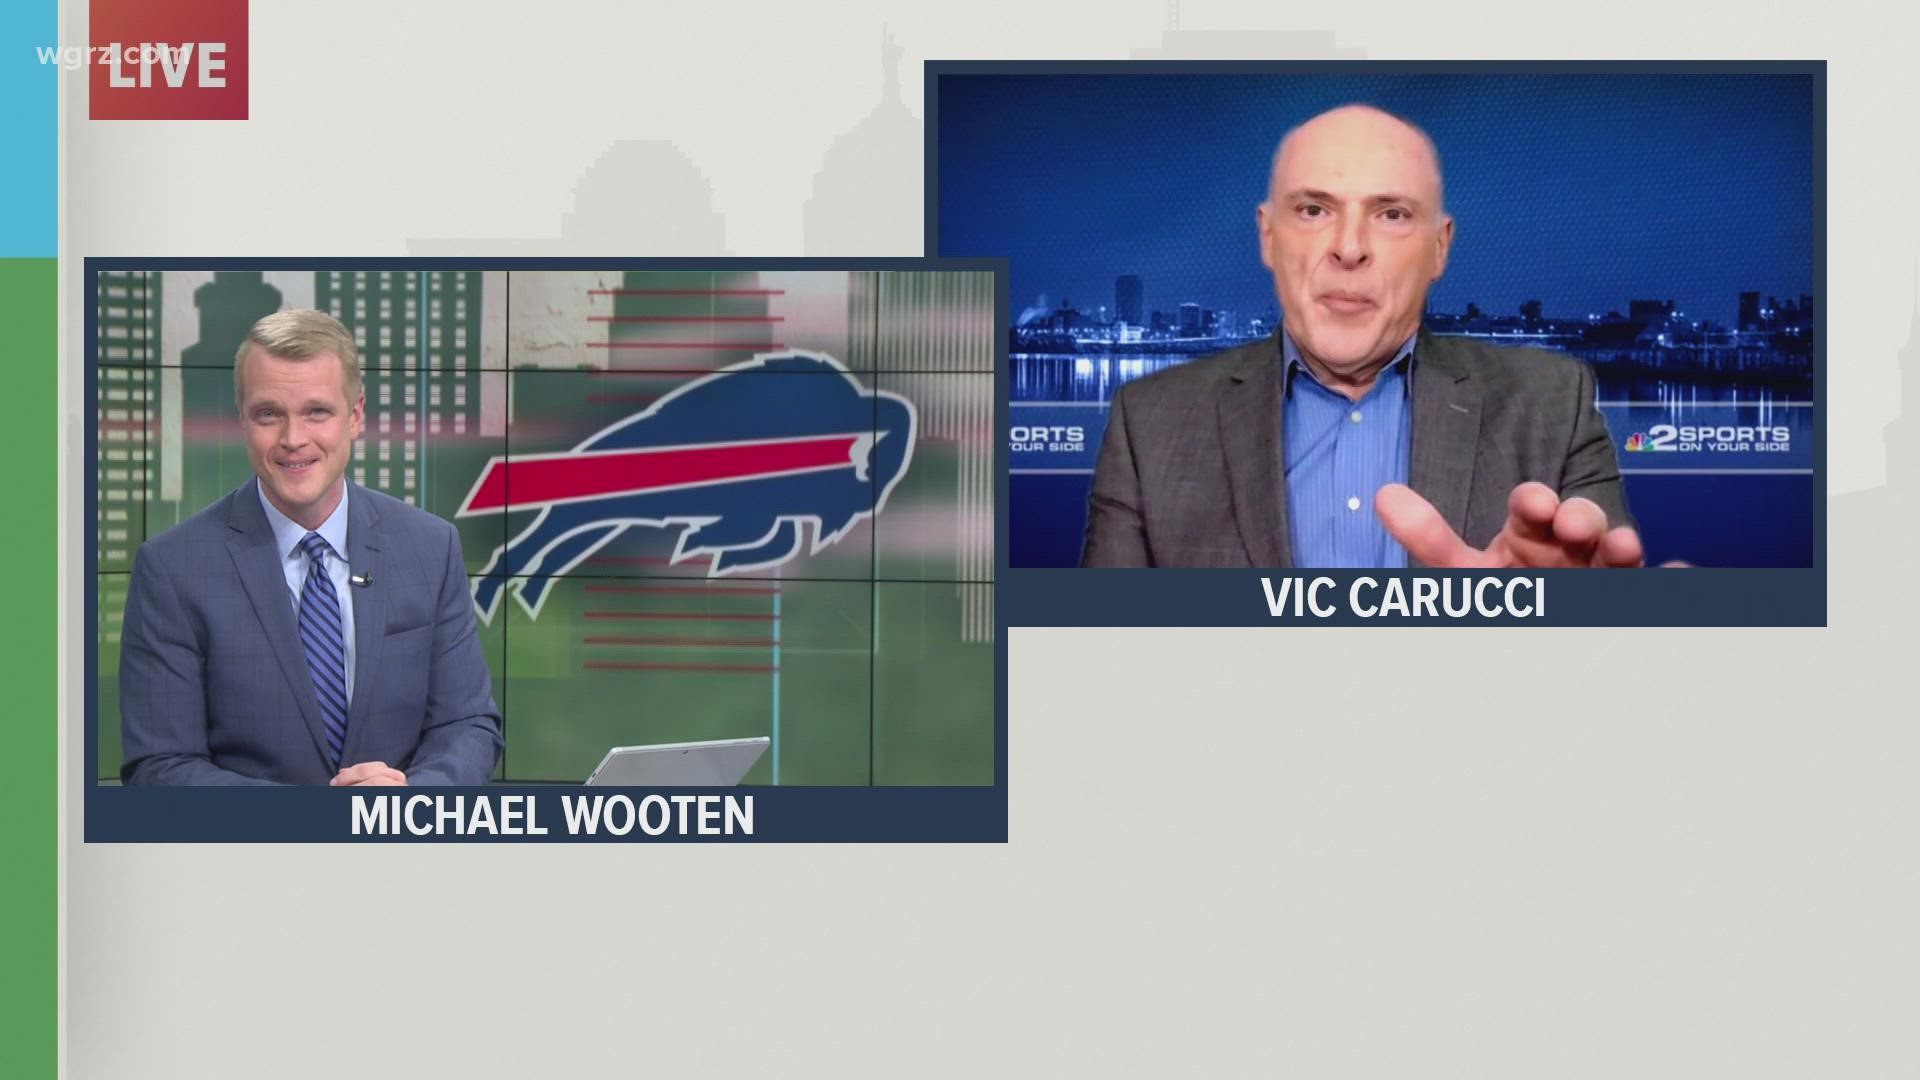 Our Bills Insider Vic Carucci Gives Us His insight in what went wrong in the Bills playoff loss to Kansas City.